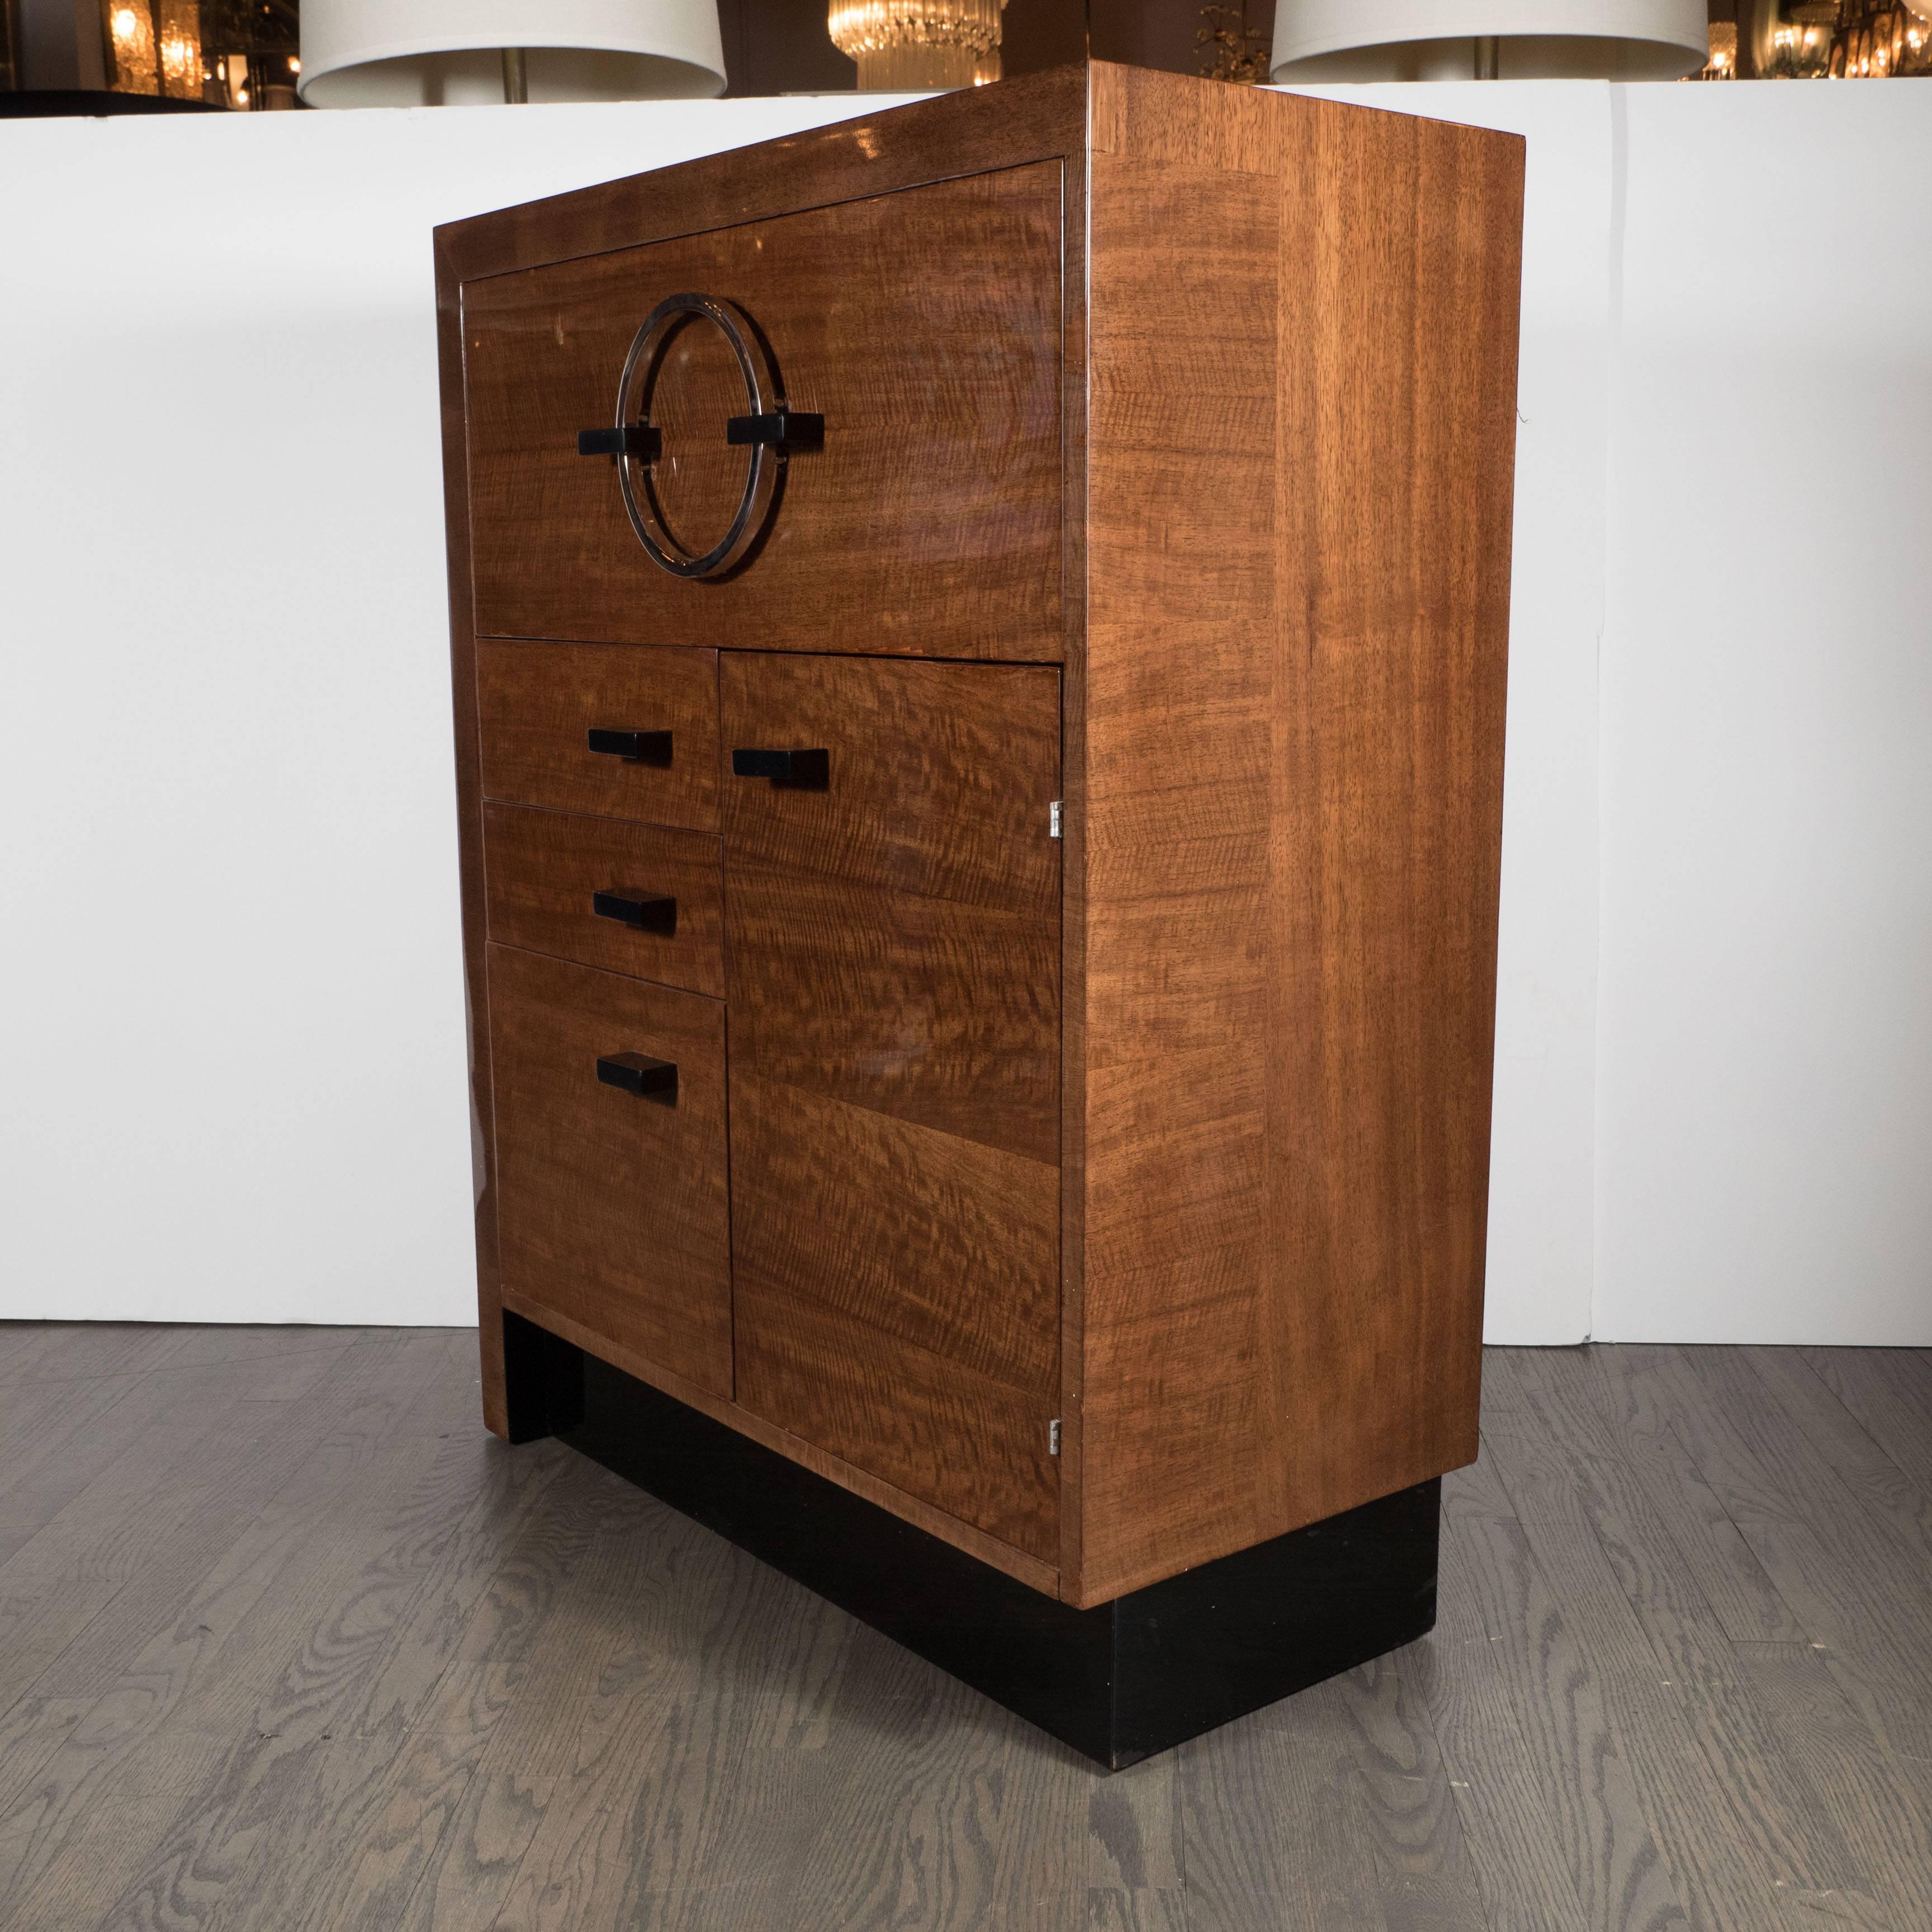 An streamline Machine Age Art Deco cabinet or secretaire by Gilbert Rohde in bookmatched East Indian Laurel with black lacquer accents featuring a drop-down door which covers several compartments and a drawer. This piece has a polished nickel